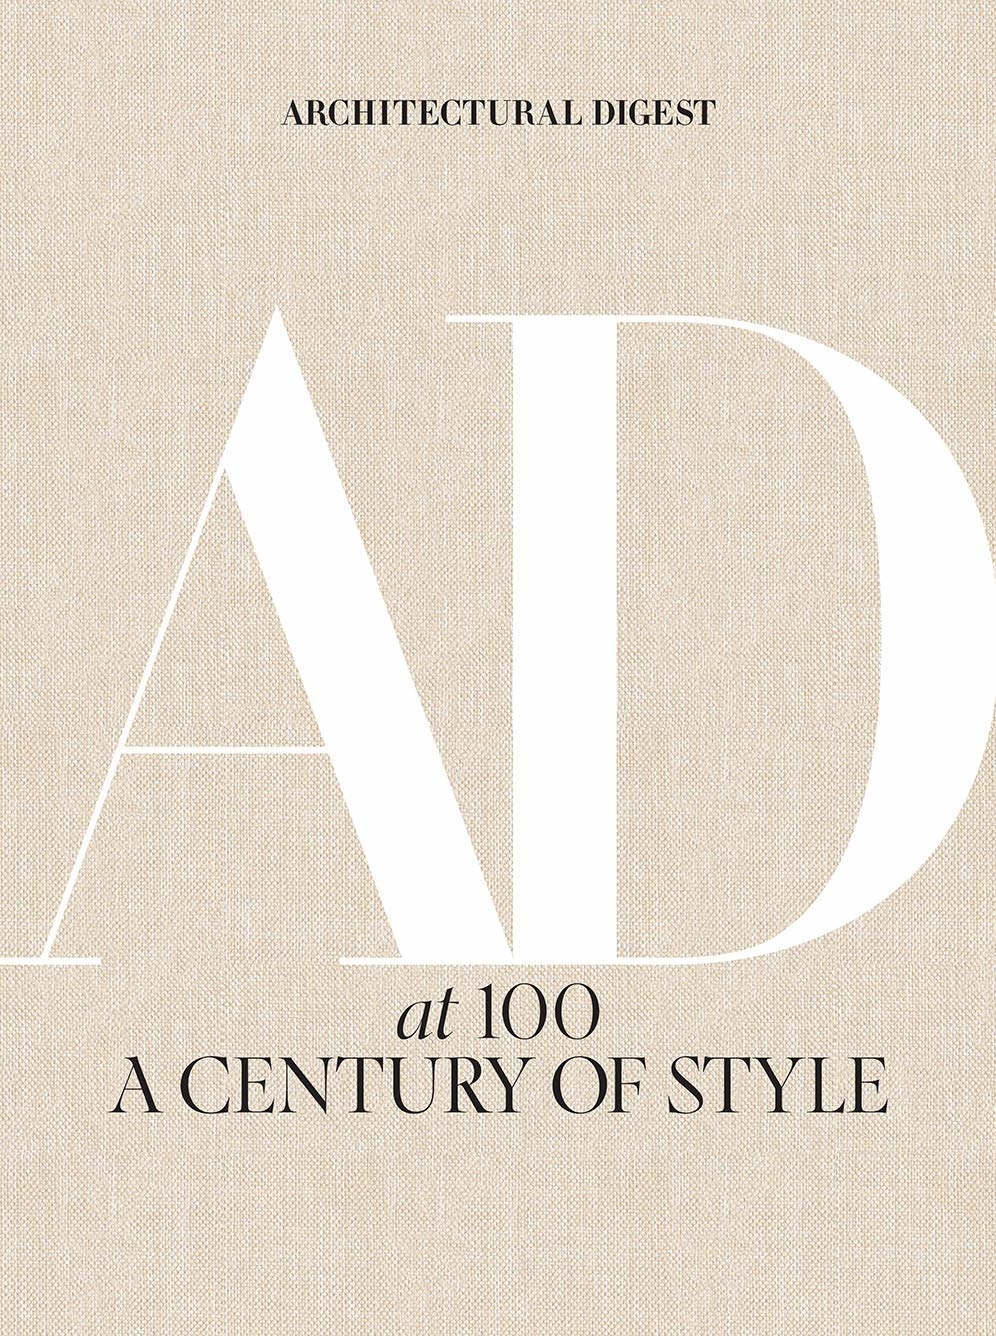 Cover of Architectural Digest&#x27;s &quot;AD at 100: A Century of Style&quot; with title text dominating the image